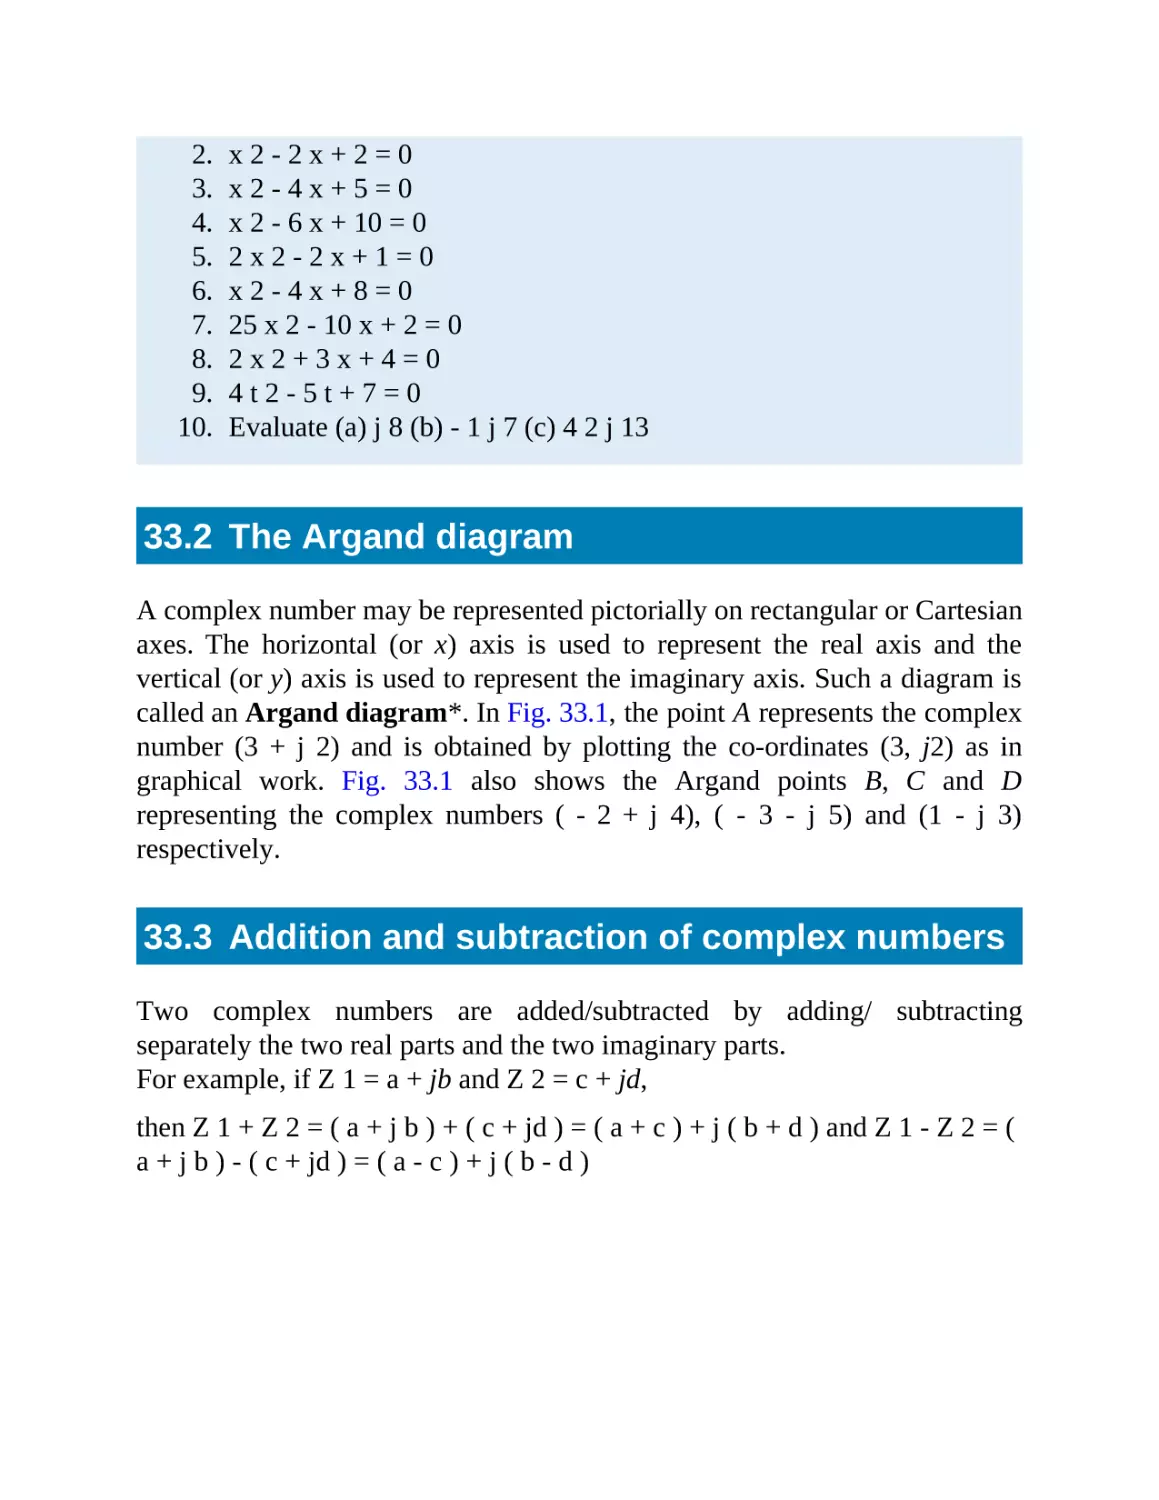 33.2 The Argand diagram
33.3 Addition and subtraction of complex numbers